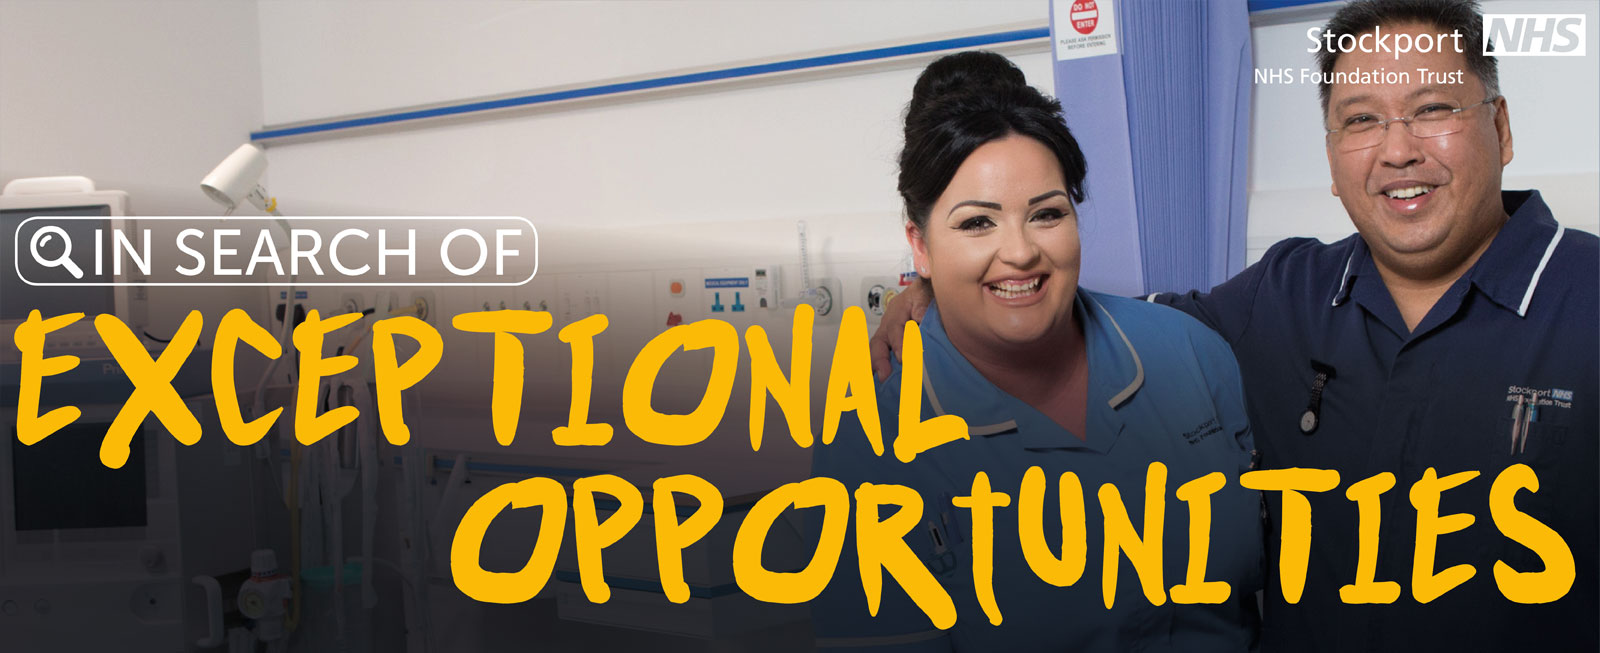 Exceptional Opportunities. Two smiling nurses.